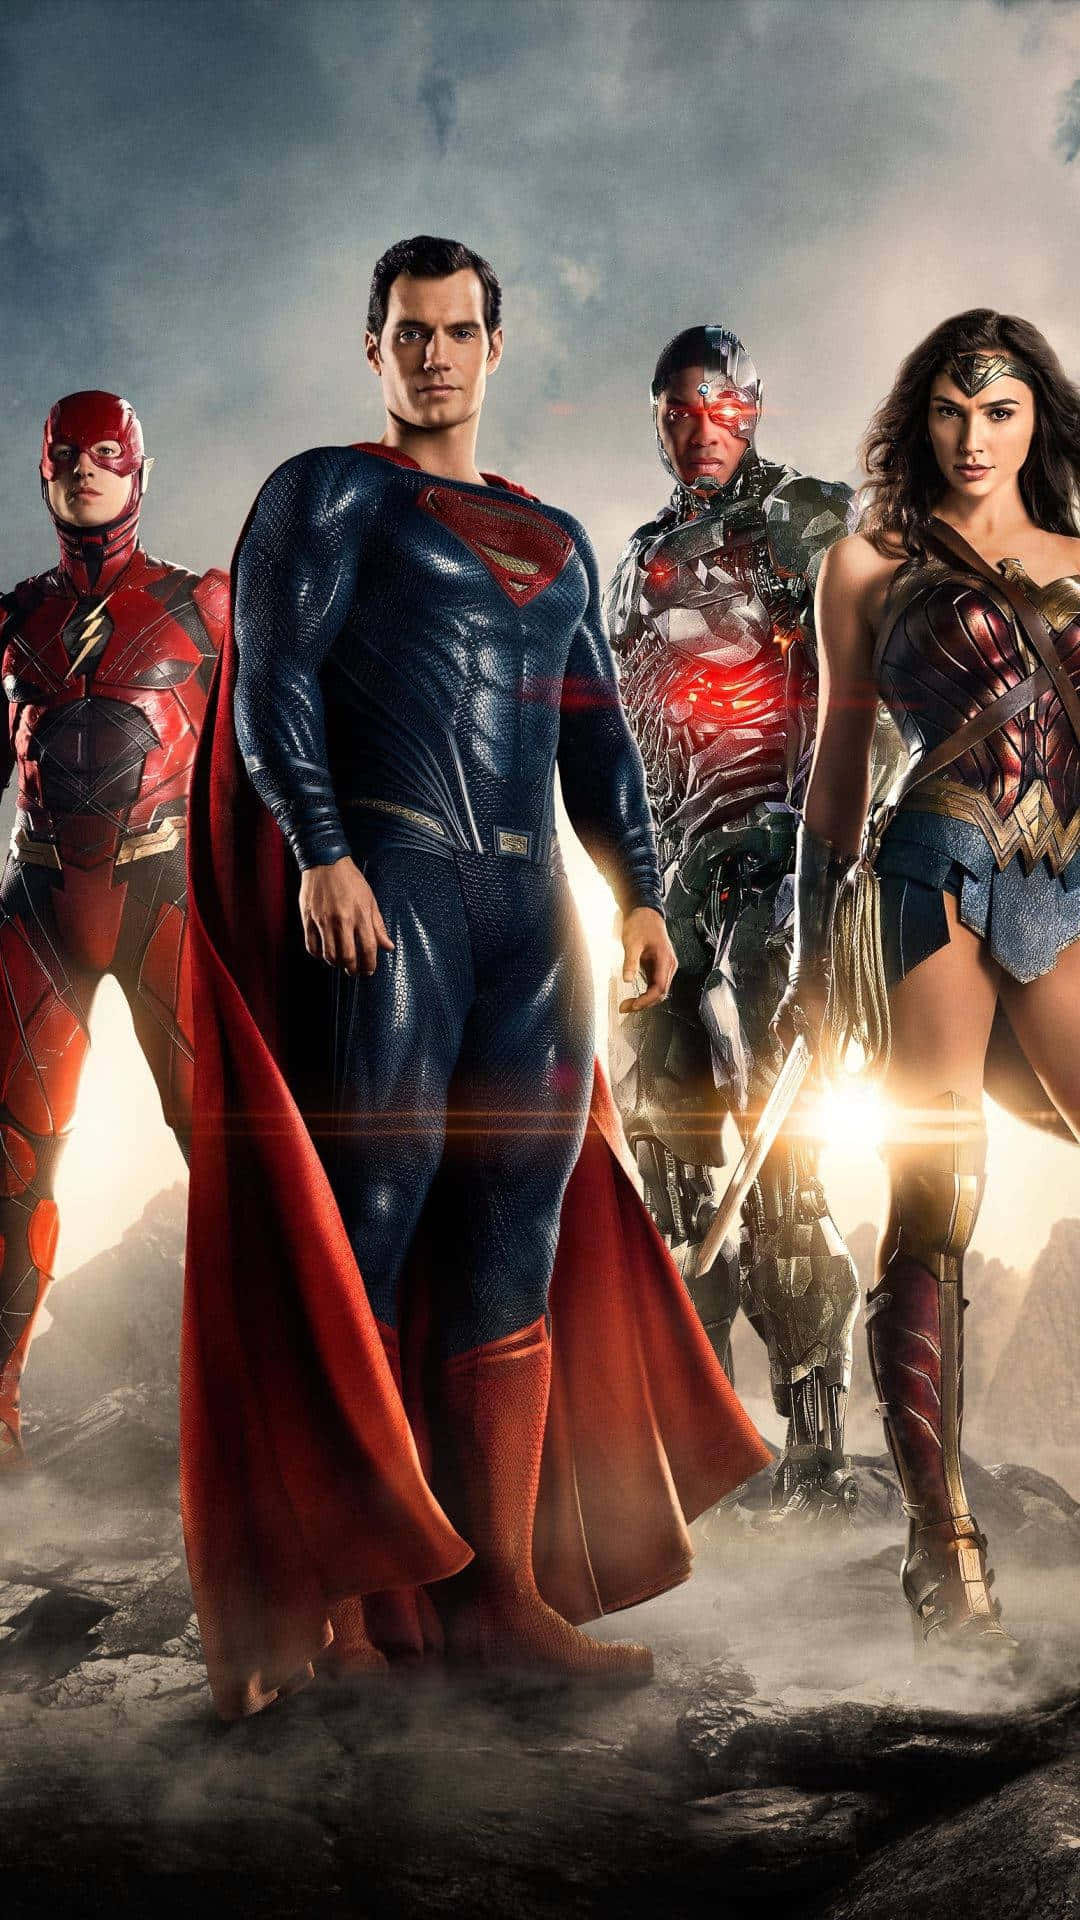 Assemble of Heroes - The Justice League